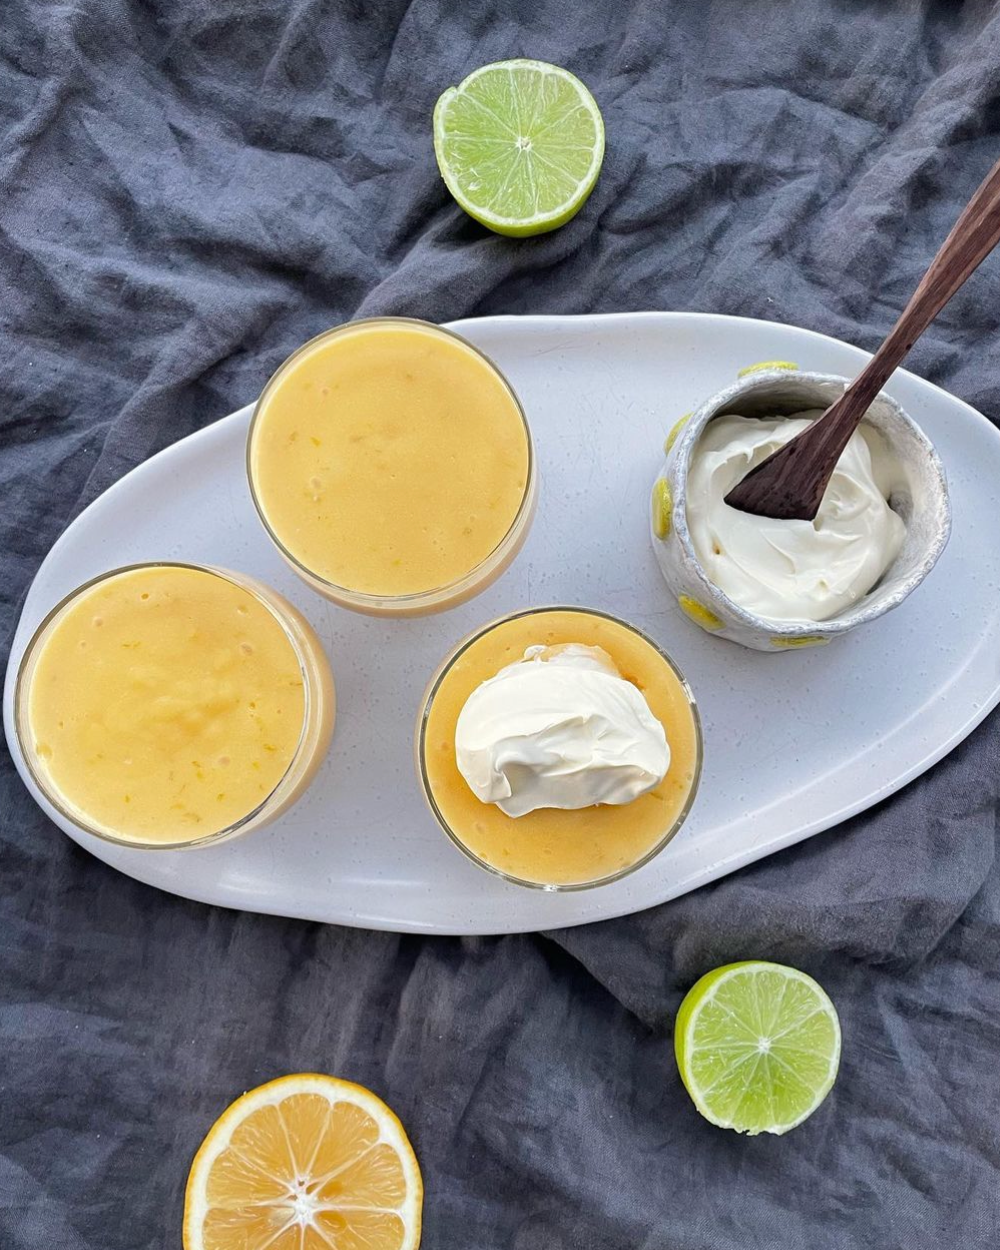 Lemon-and-Lime-Panna-Cotta-Ingredients